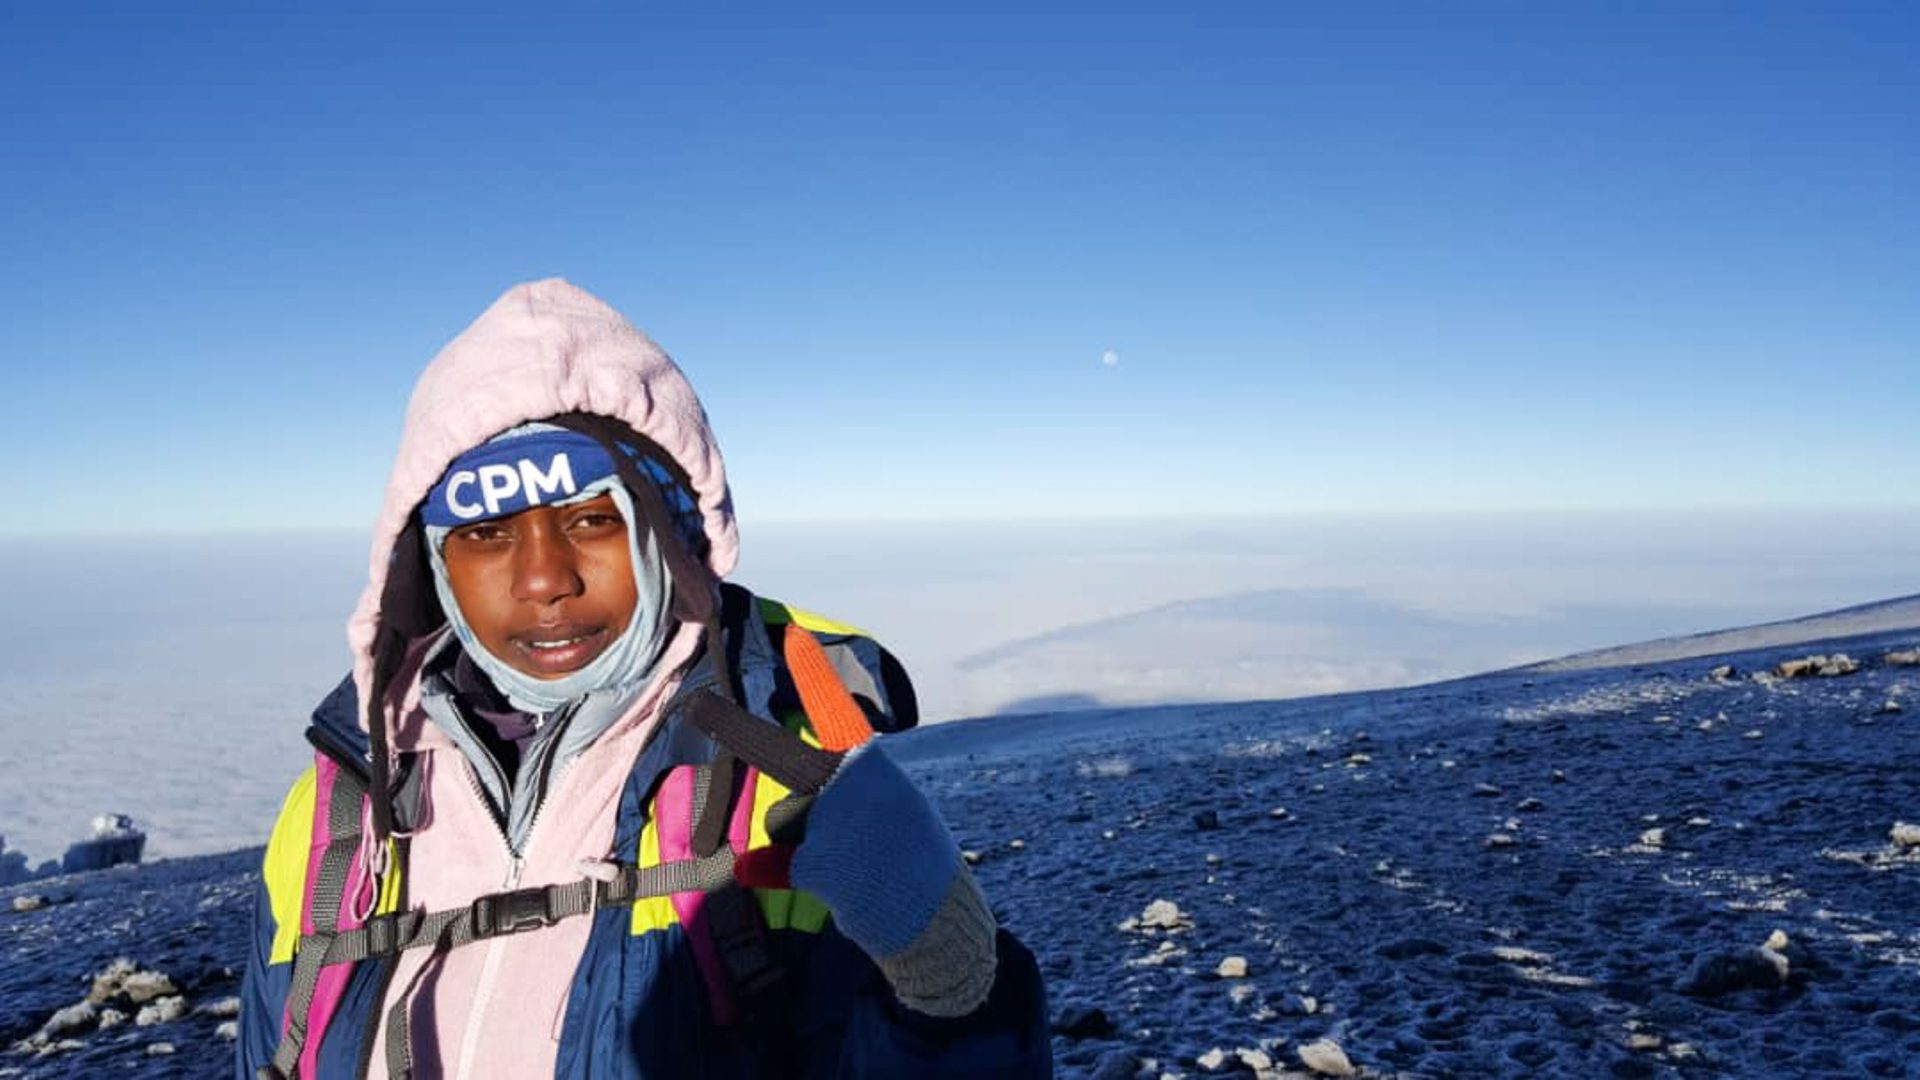 “The mountain is hard, and I’m not giving up.” How one woman is smashing Kilimanjaro’s glass rooftop